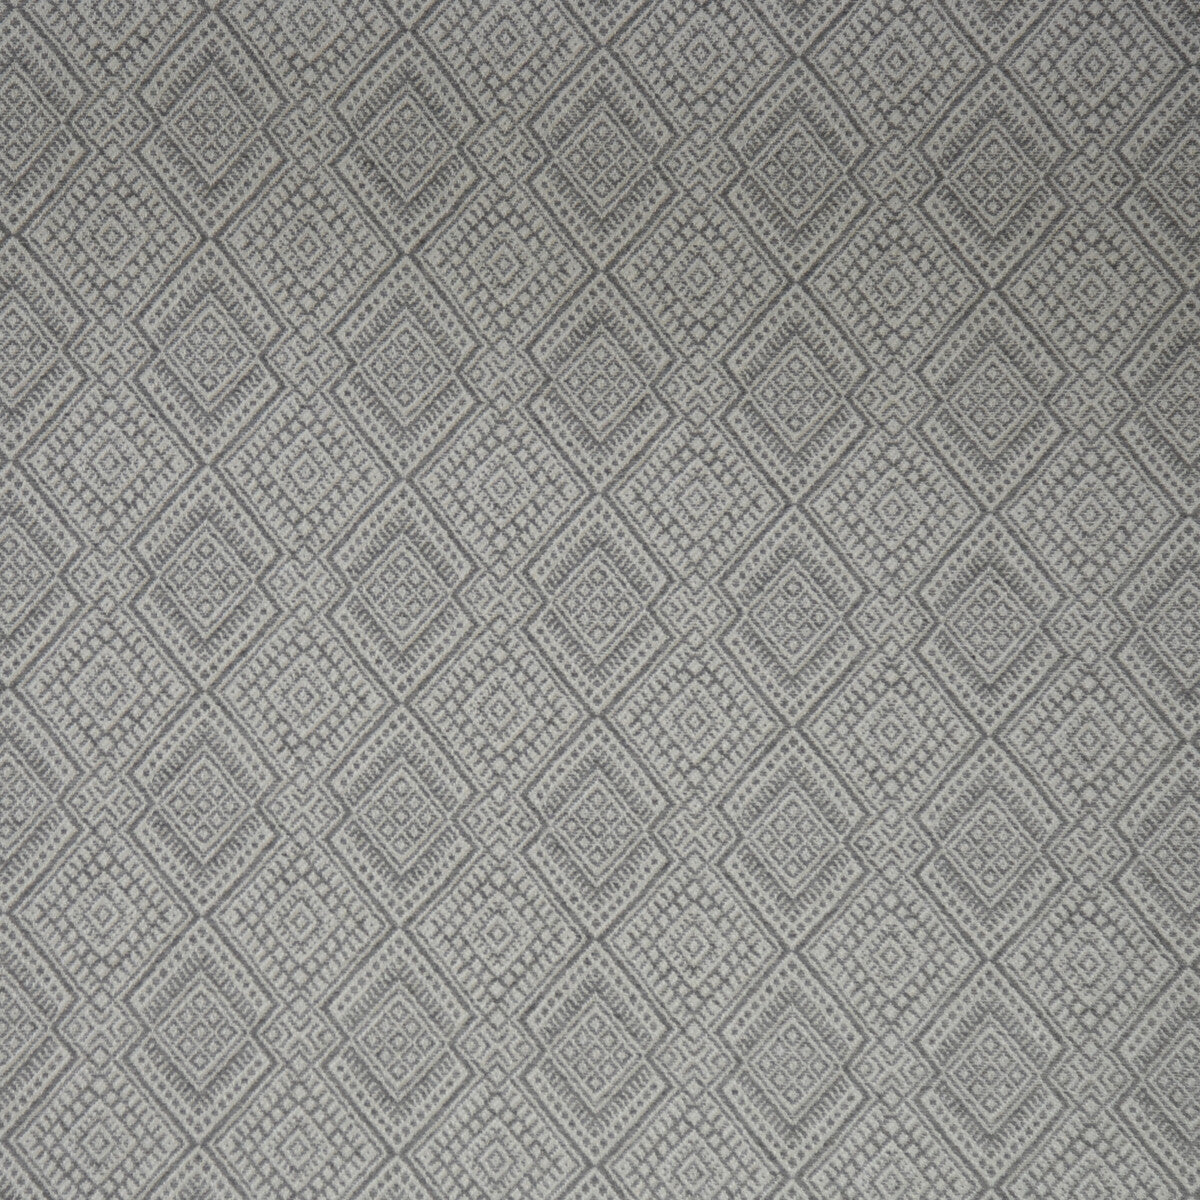 Iguazu fabric in platinum color - pattern 35551.11.0 - by Kravet Couture in the Modern Colors-Sojourn Collection collection